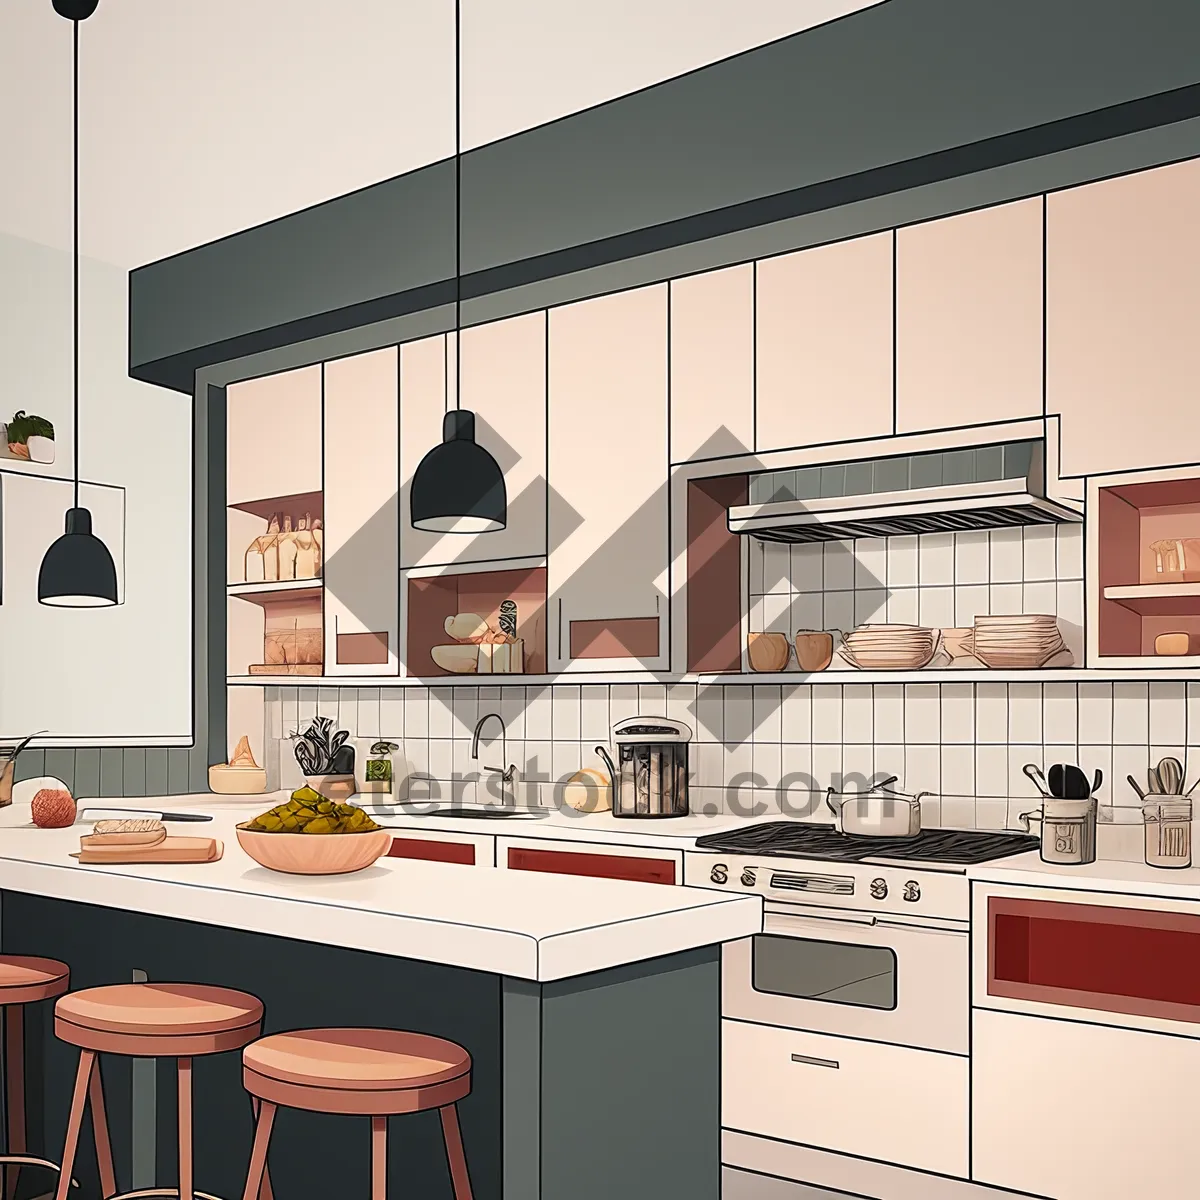 Picture of Contemporary Kitchen Interior with Sleek Furniture, Excellent Lighting, and a Soothing Color Palette